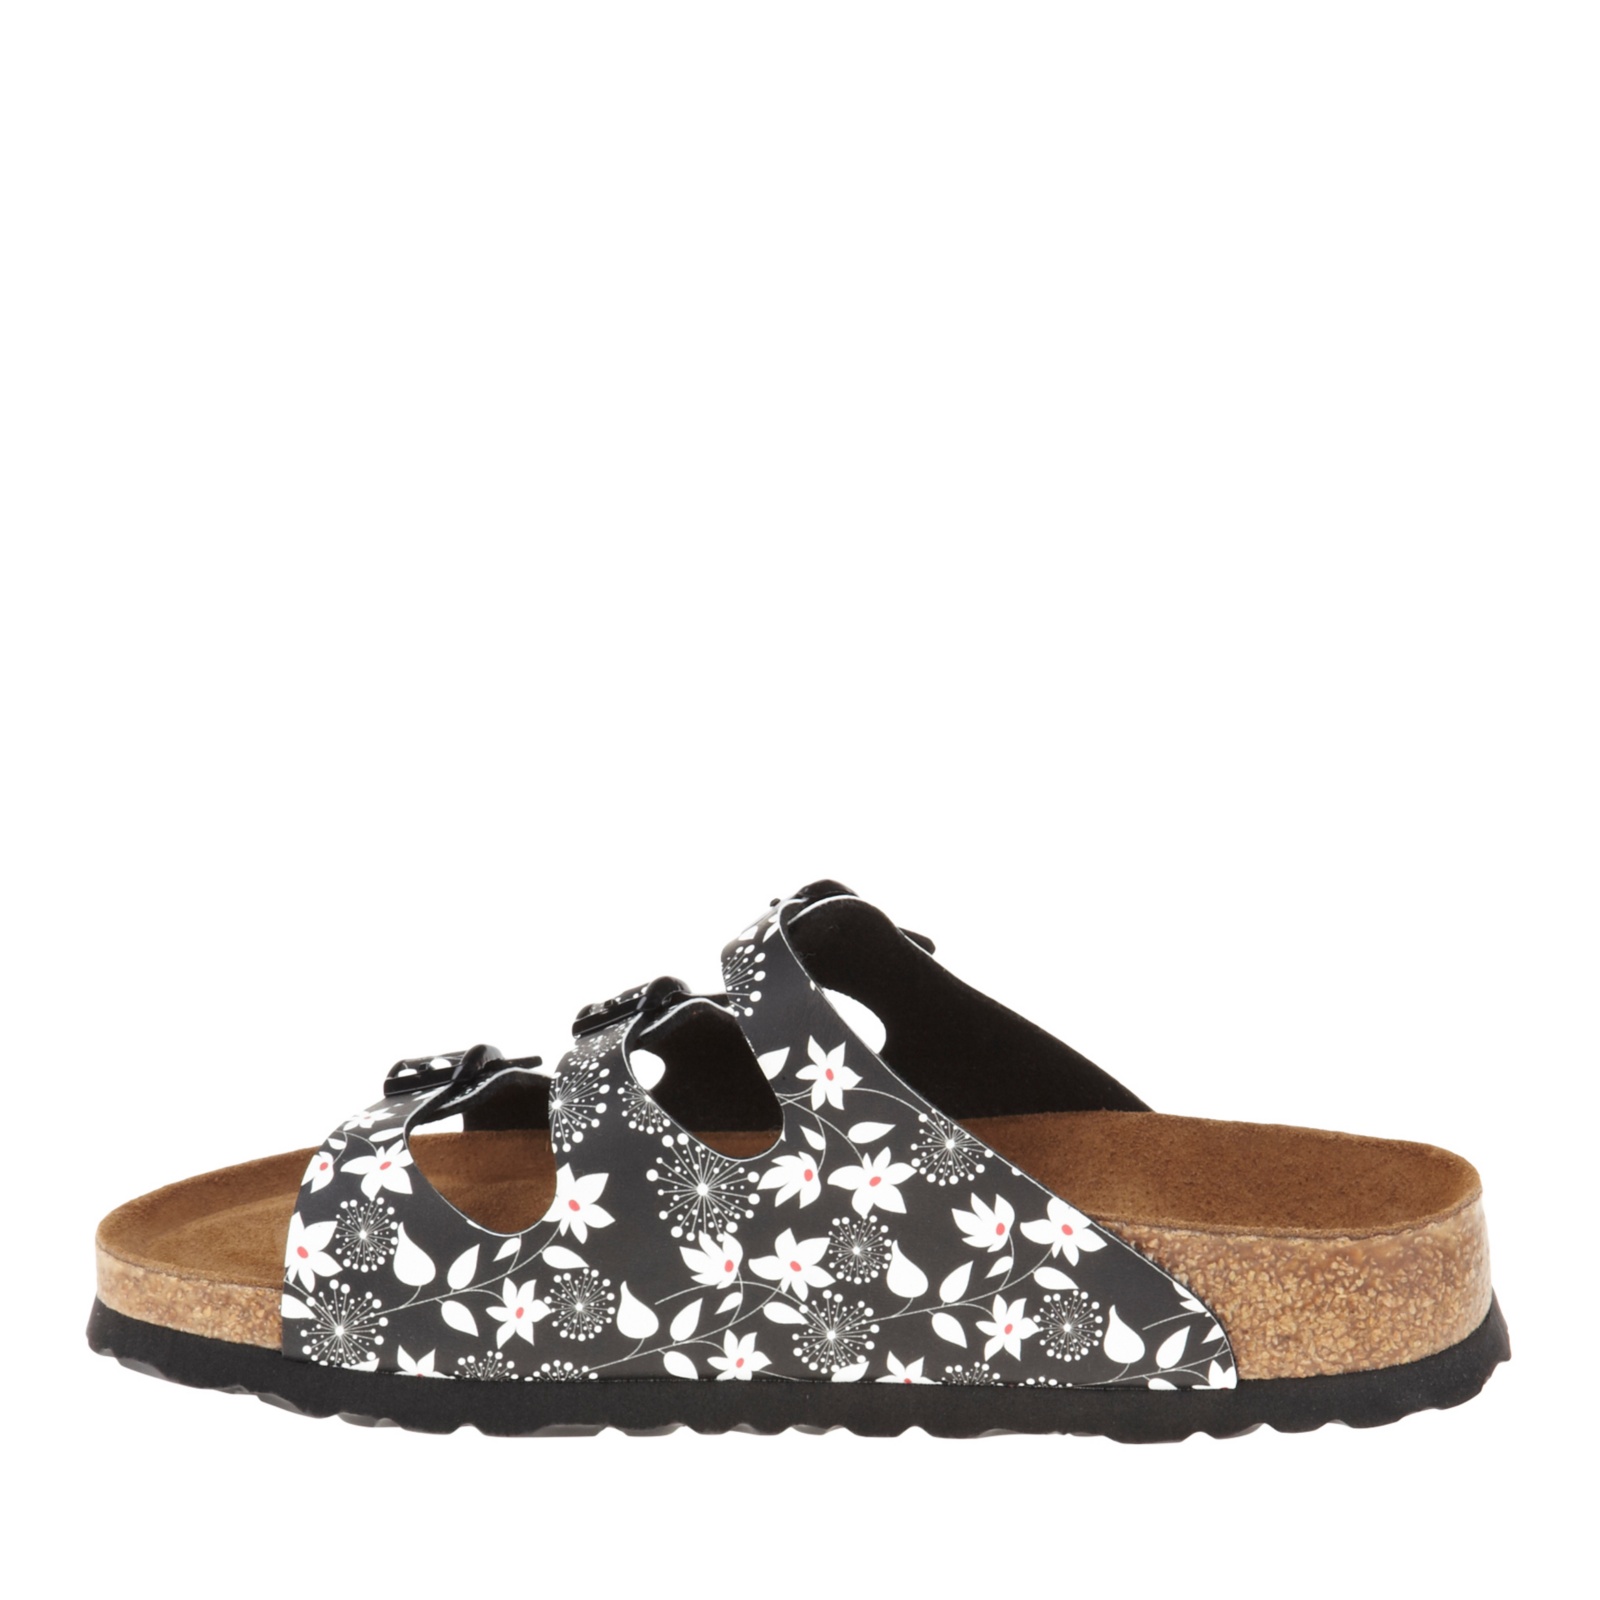 Details about Papillio by Birkenstock Florida Soft Footbed Floral ...